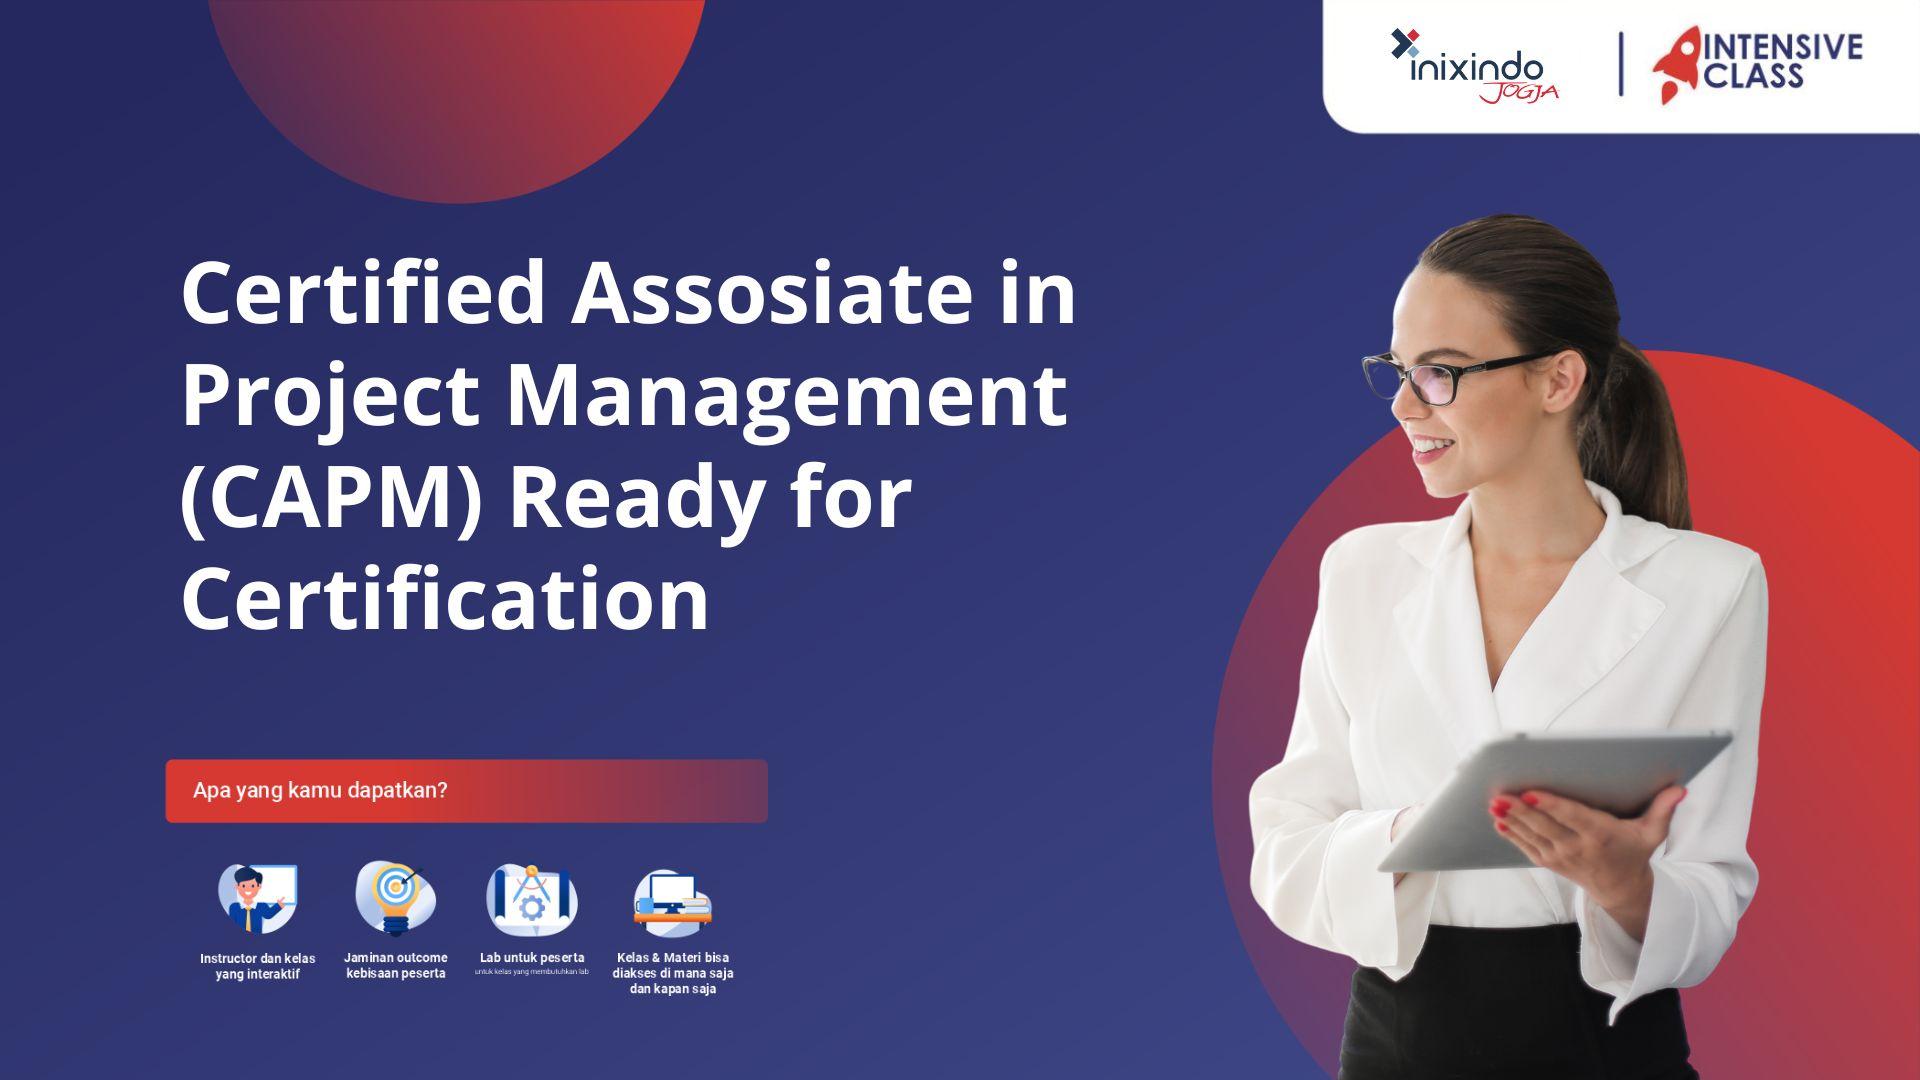 Certified Associate in Project Management (CAPM) Ready for Certification 7